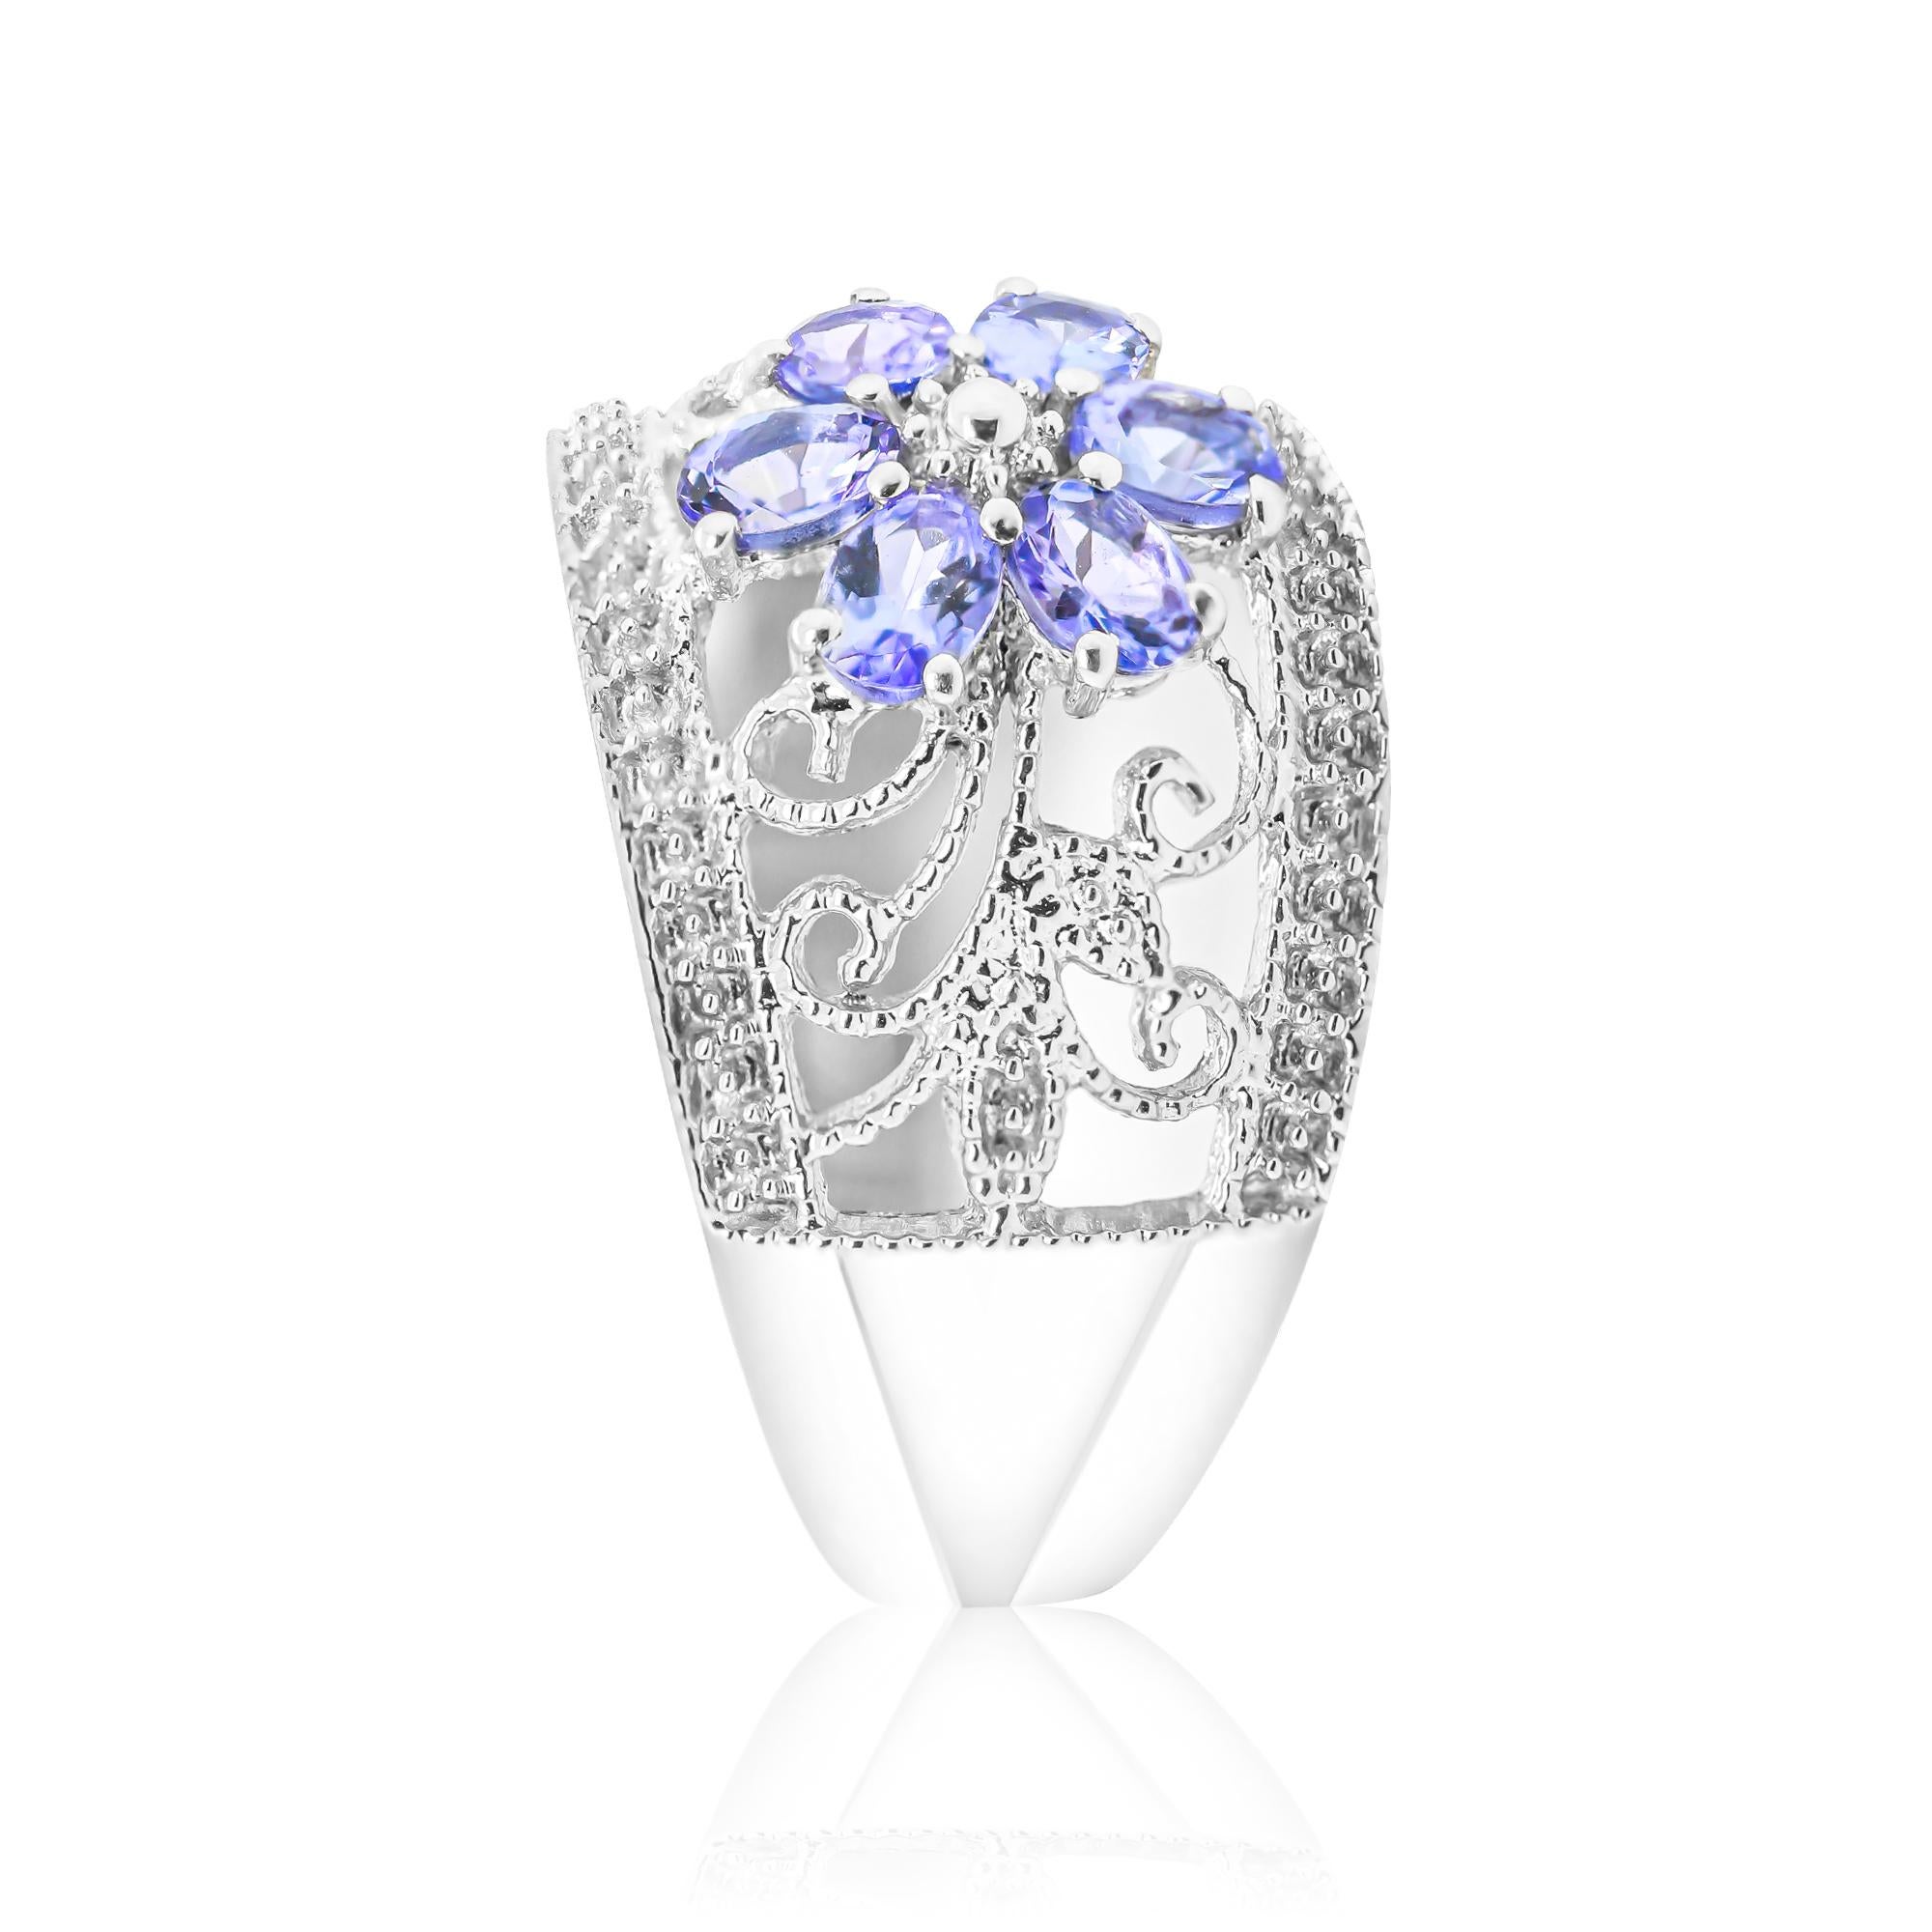 Stunning, timeless and classy eternity Unique ring. Decorate yourself in luxury with this Gin & Grace ring. This ring is made up of Pear-cut Prong Setting Tanzanite (6pcs) 1.05 Carat for a lovely design. This ring is weight 5.84 grams. The ring is